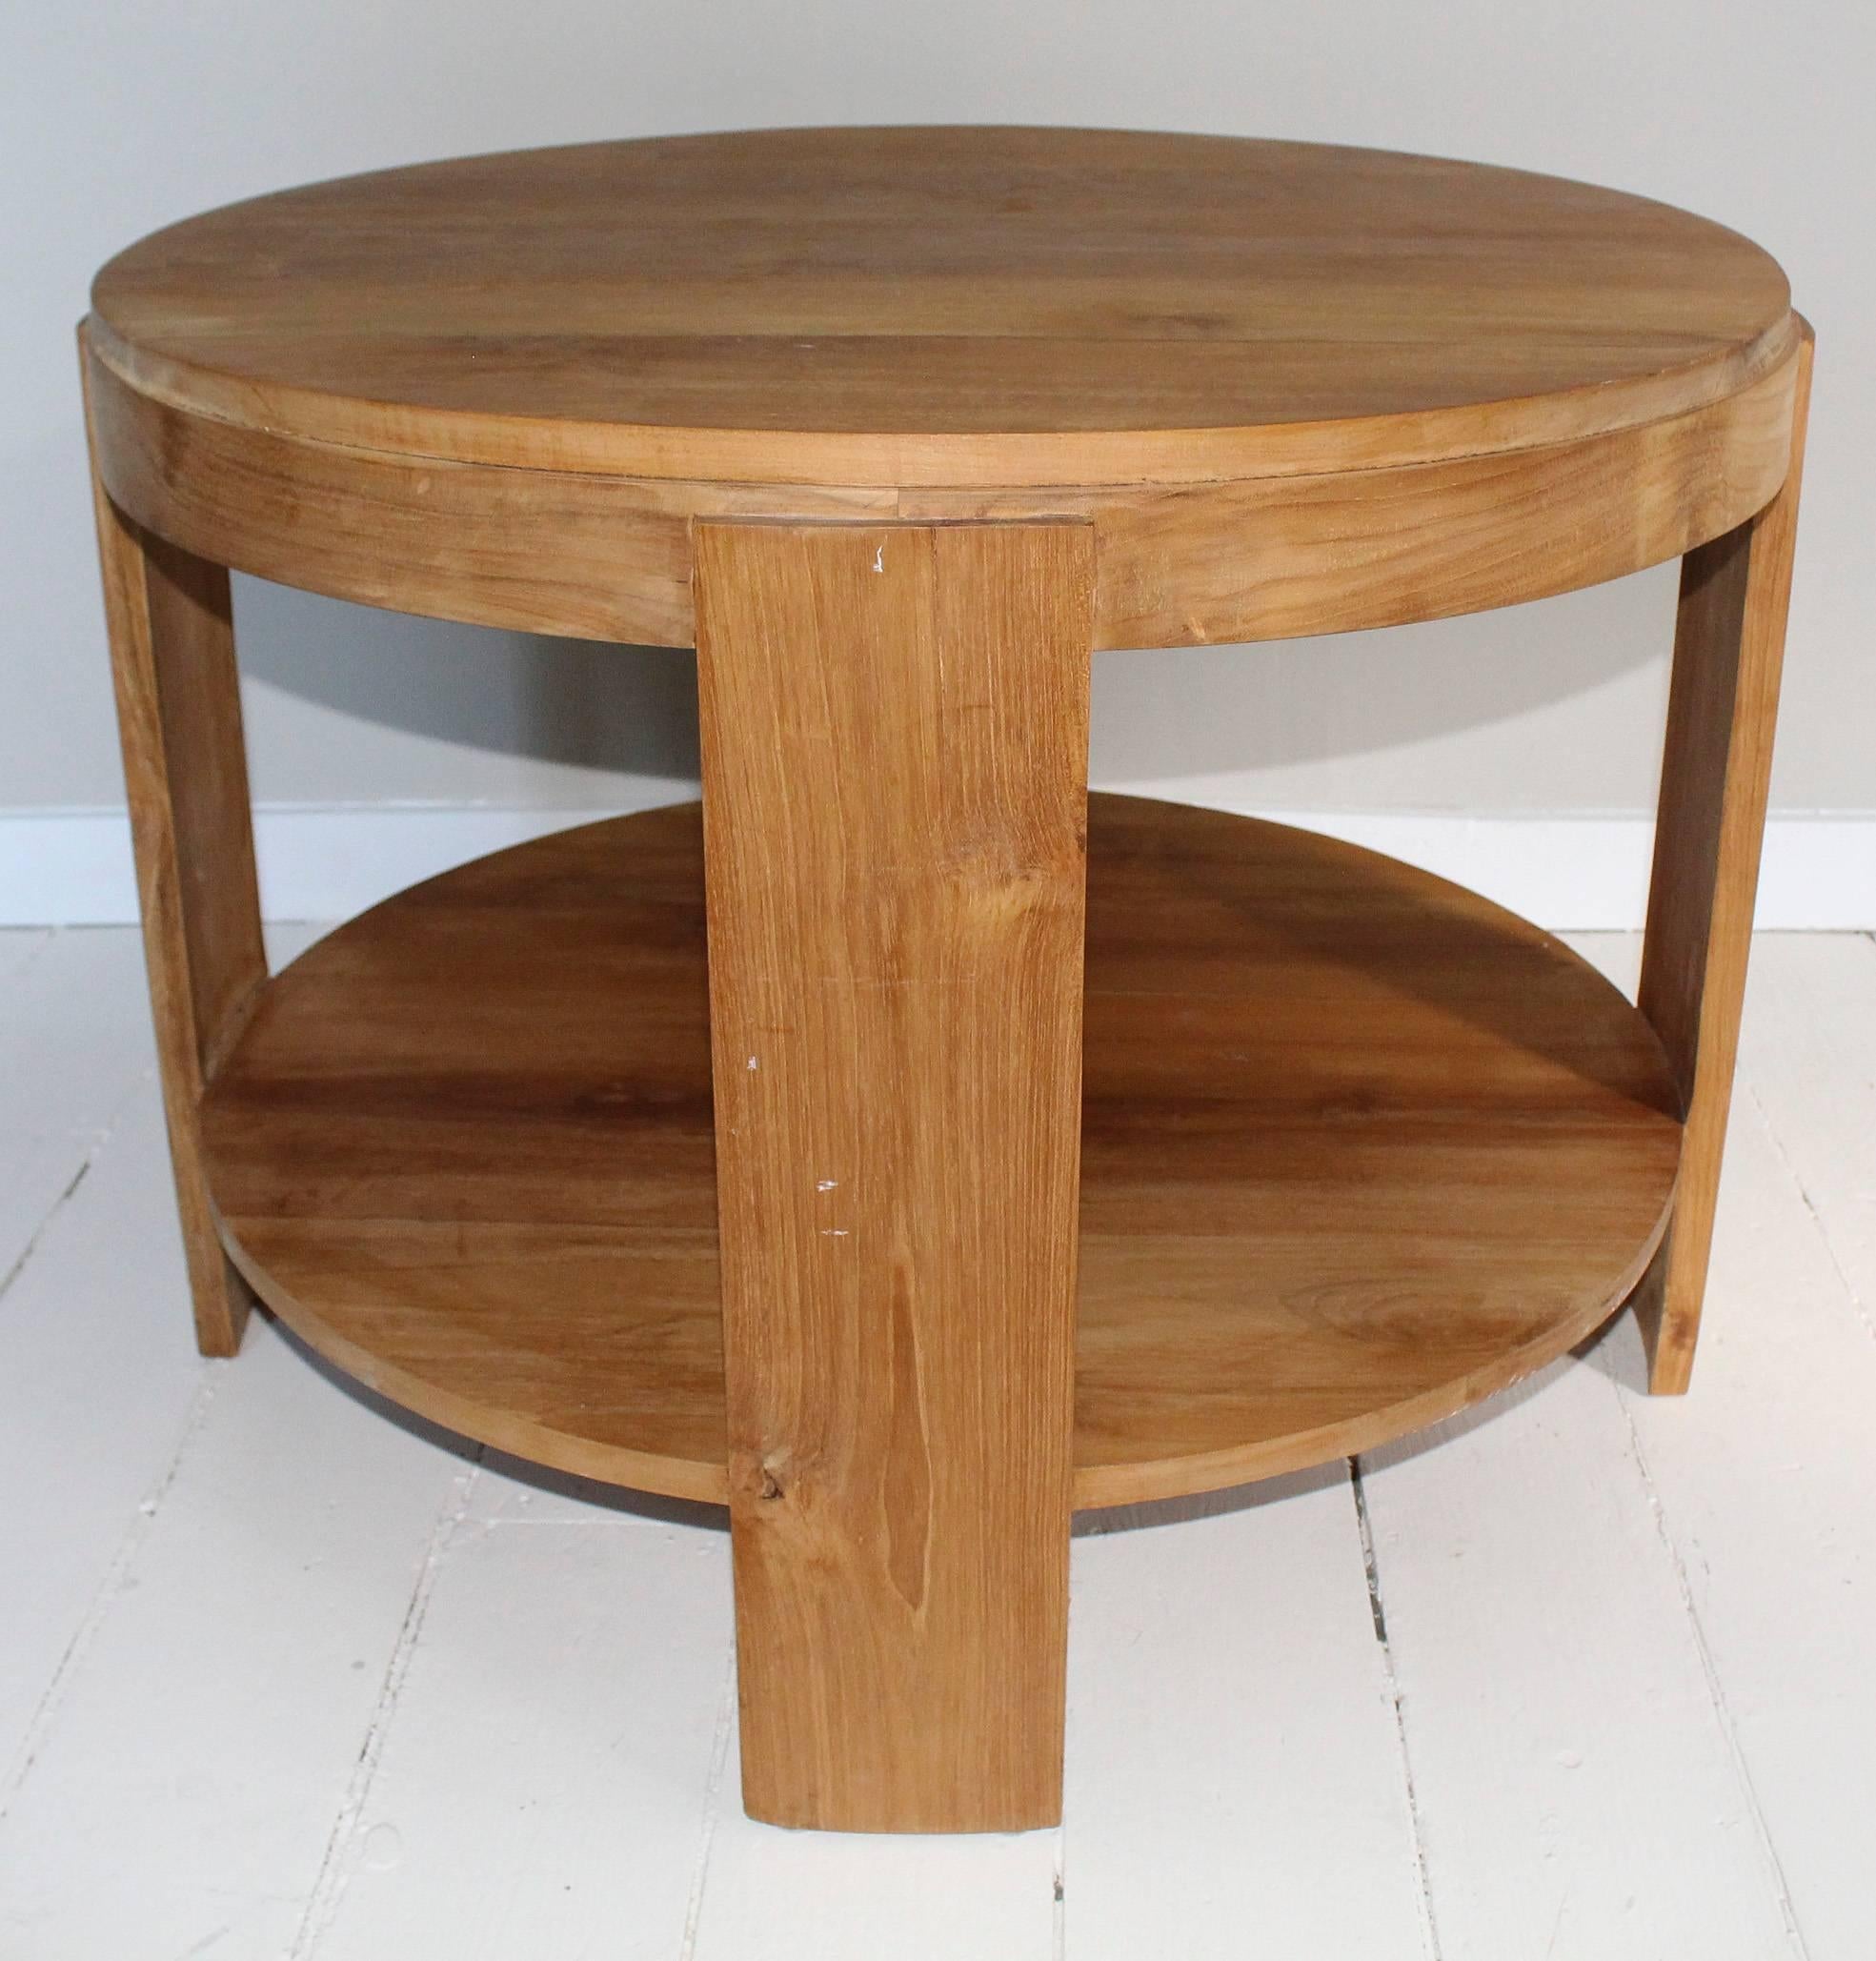 Modern circular two-tier table in bleached oak.